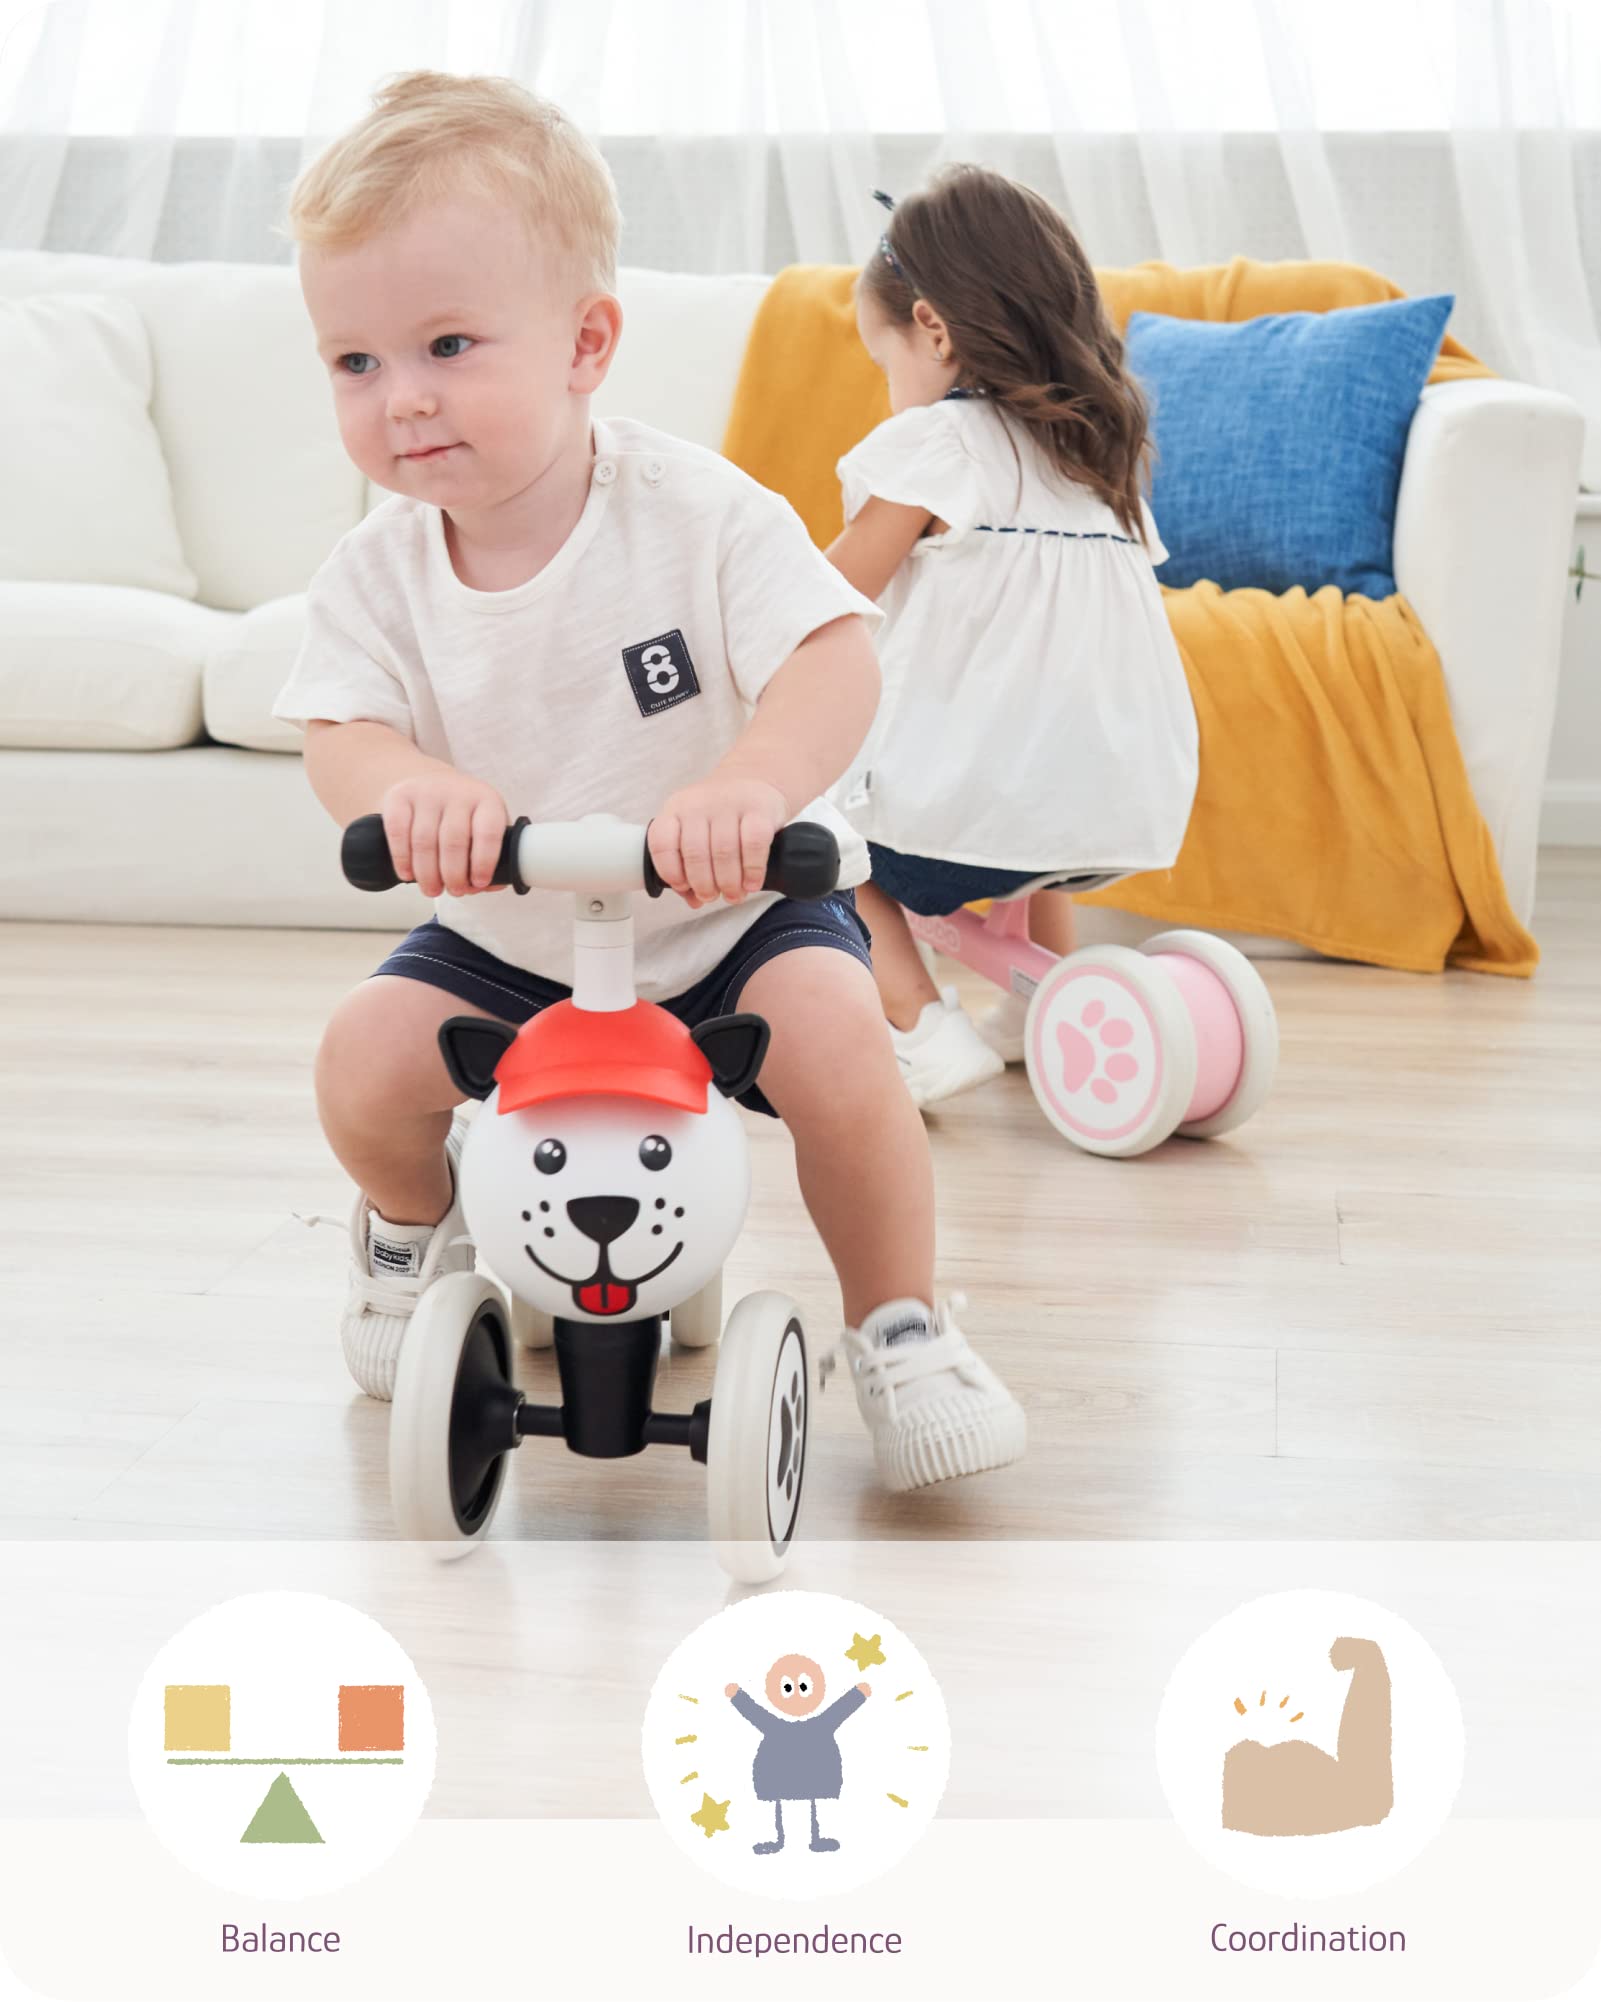 KRIDDO Baby Balance Bike for 1-2 Year Old Boy and Girl, Toddler Mini Bike for One Year Old First Birthday Gifts Baby Toys 12 Months to 2 Year Old Ride-on Toys Gifts Indoor Outdoor Balance Bike, Puppy